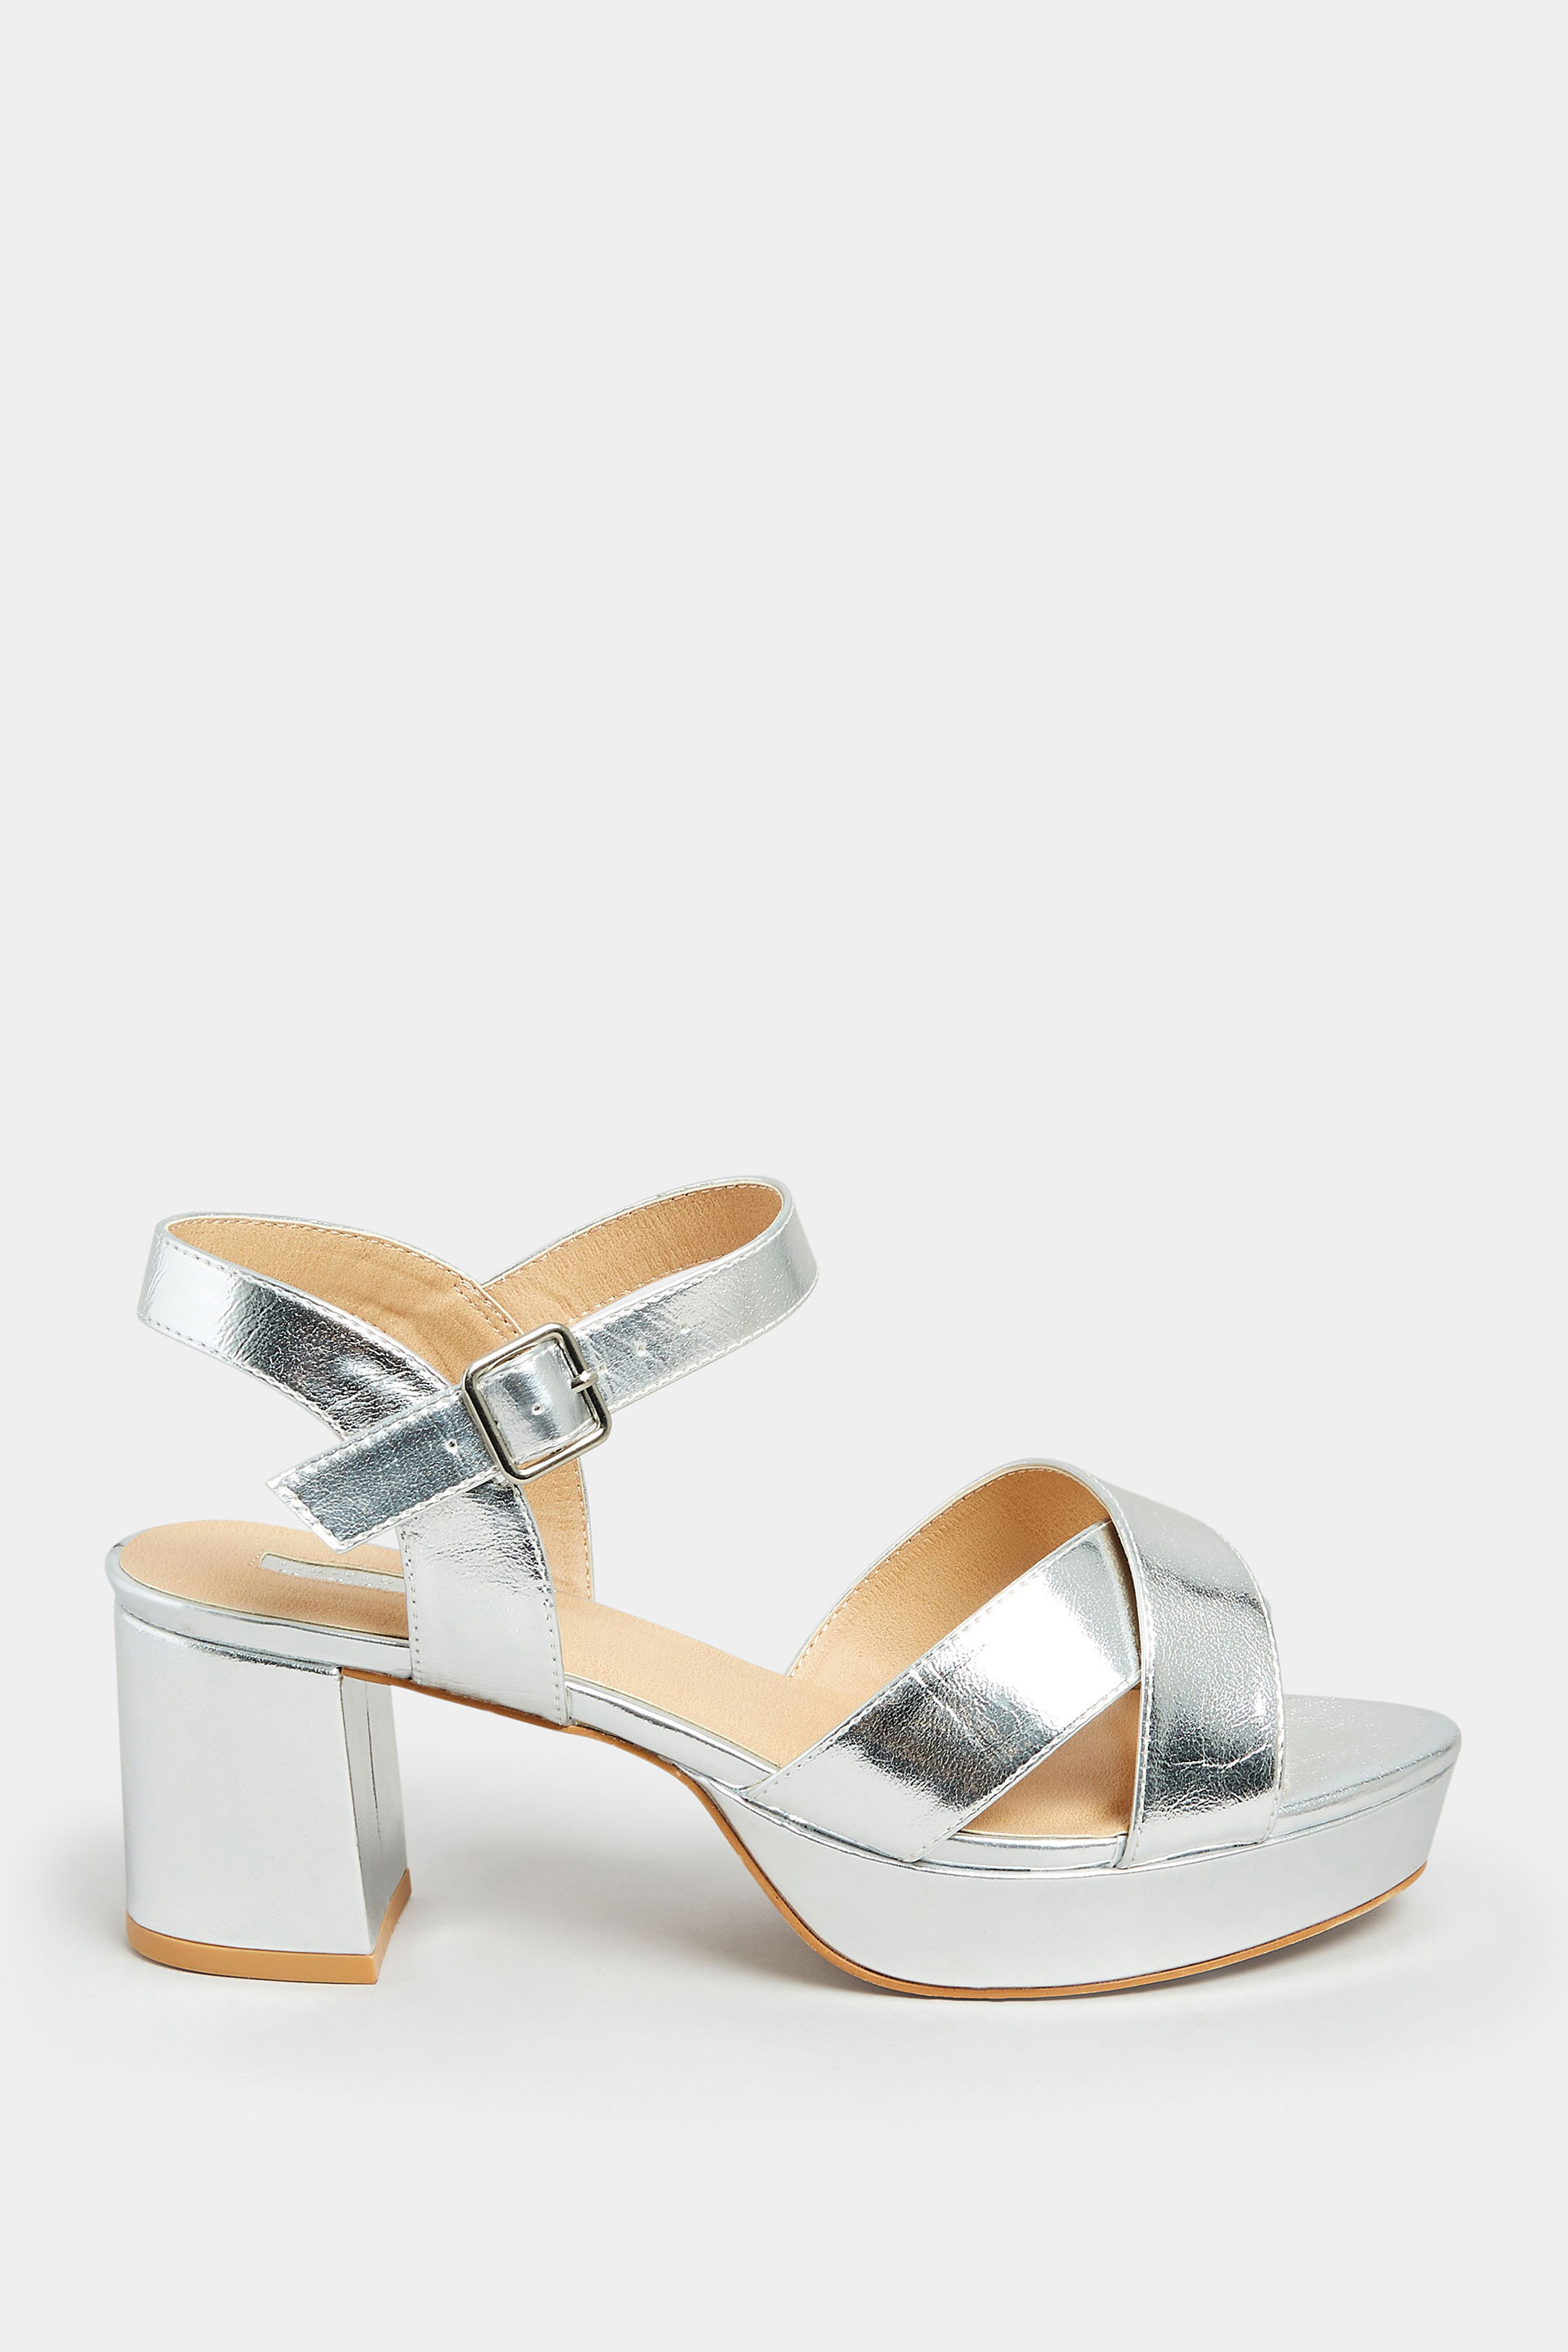 Silver Metallic Platform Heels In Wide E Fit & Extra Wide EEE Fit | Yours Clothing 3